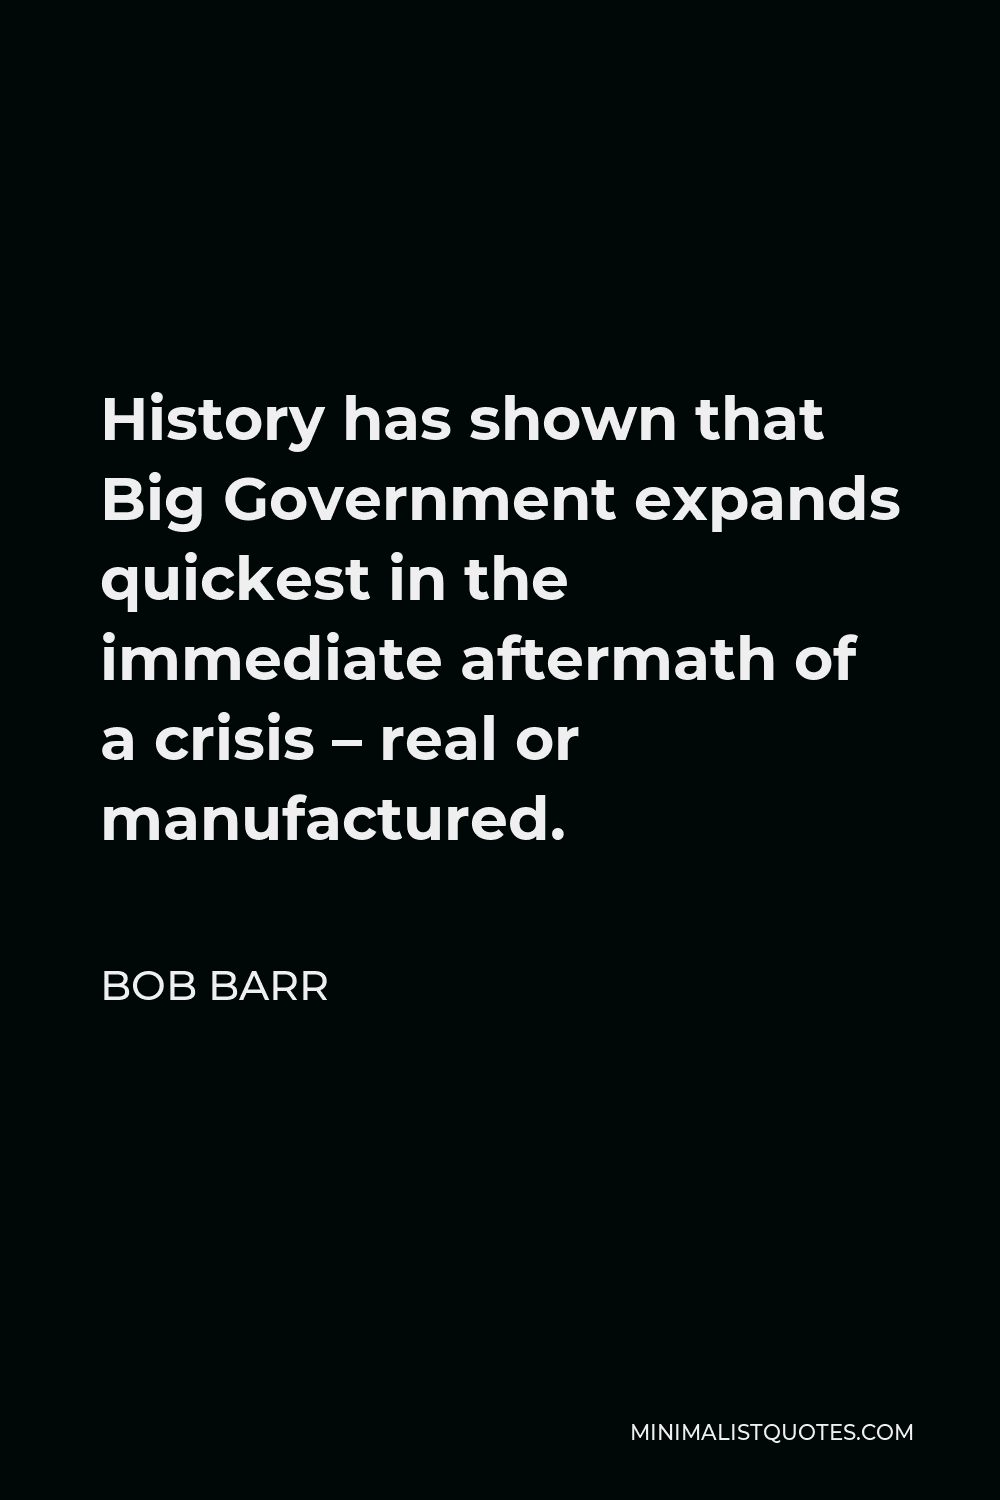 Bob Barr Quote - History has shown that Big Government expands quickest in the immediate aftermath of a crisis – real or manufactured.